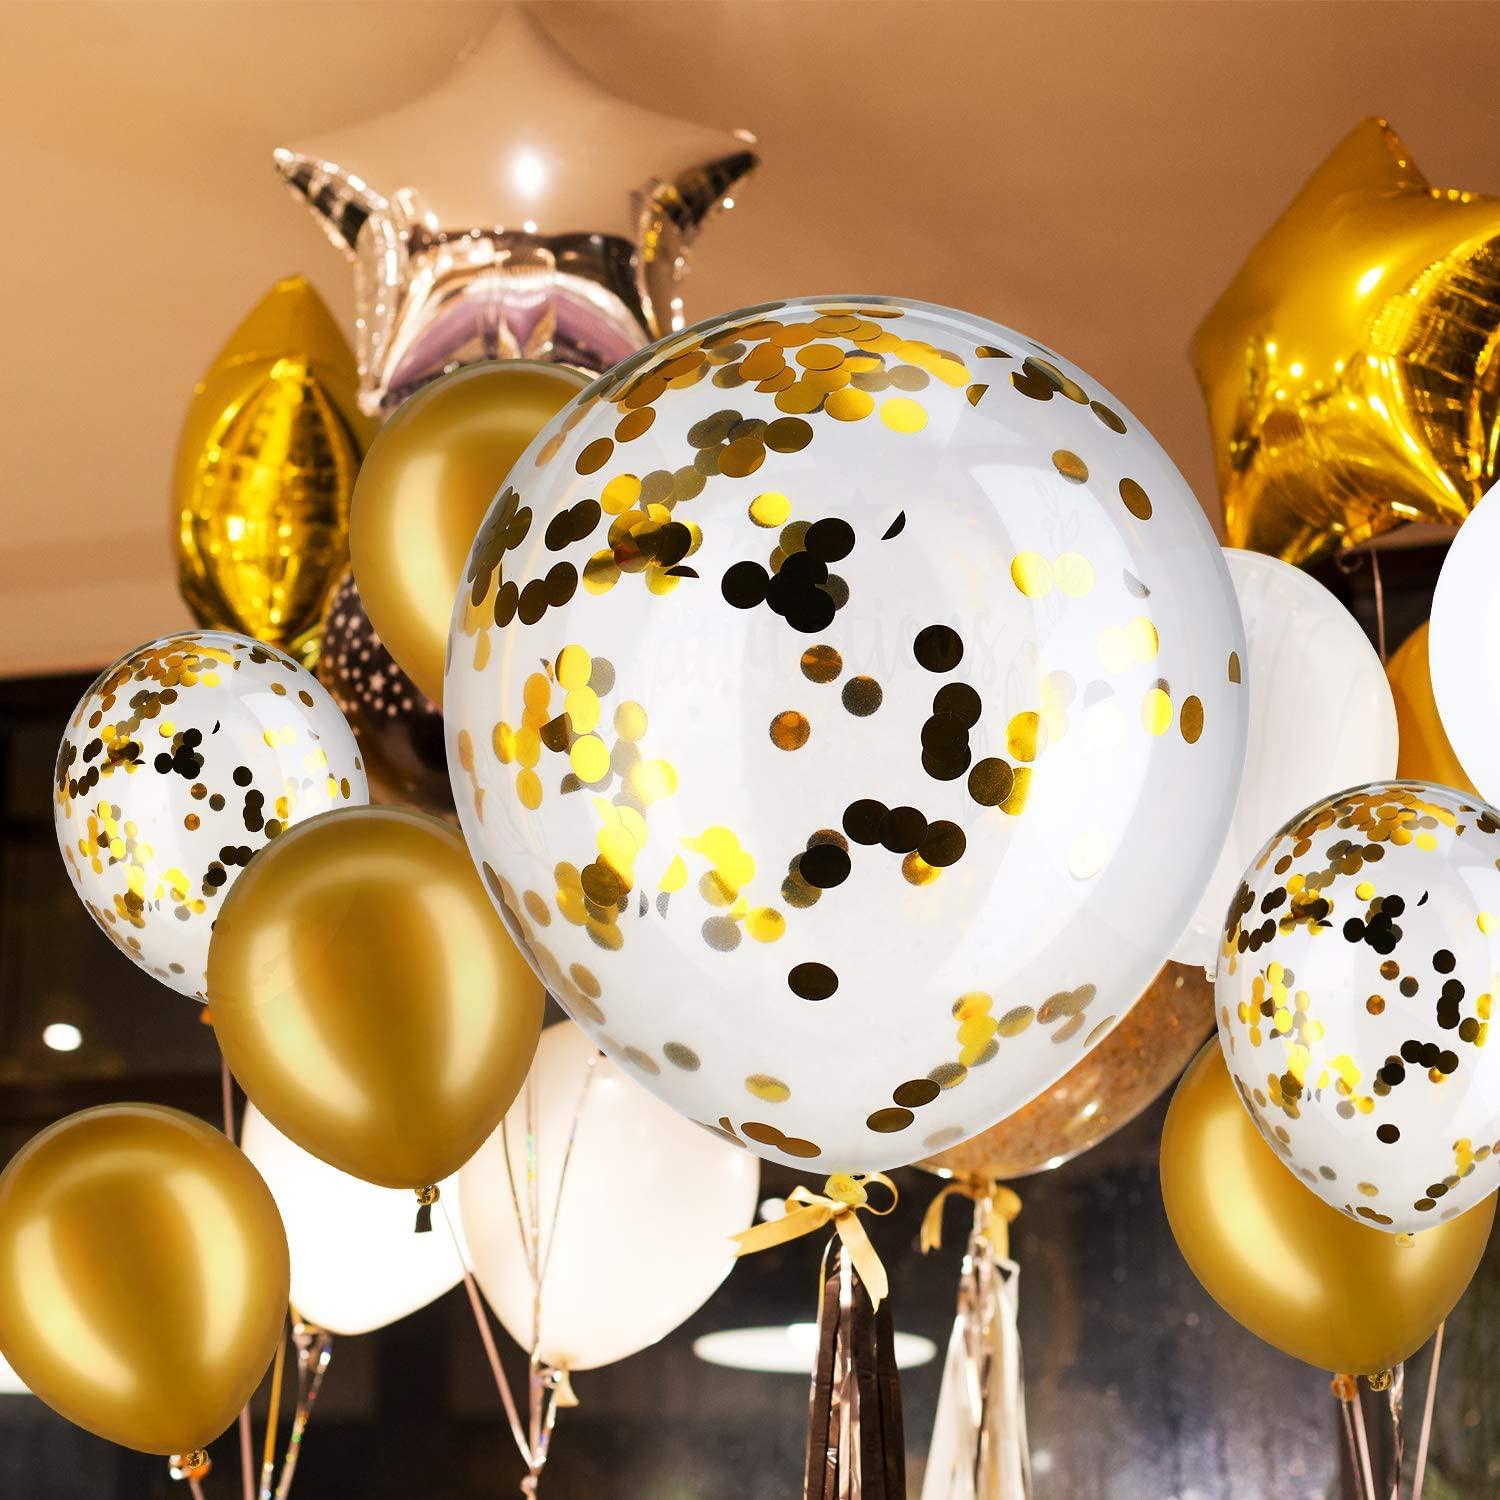 Rose Gold Confetti Latex Balloons, 60 pcs 12 inch White Metallic Gold Party Balloon with 33 Ft Ribbon - Decotree.co Online Shop